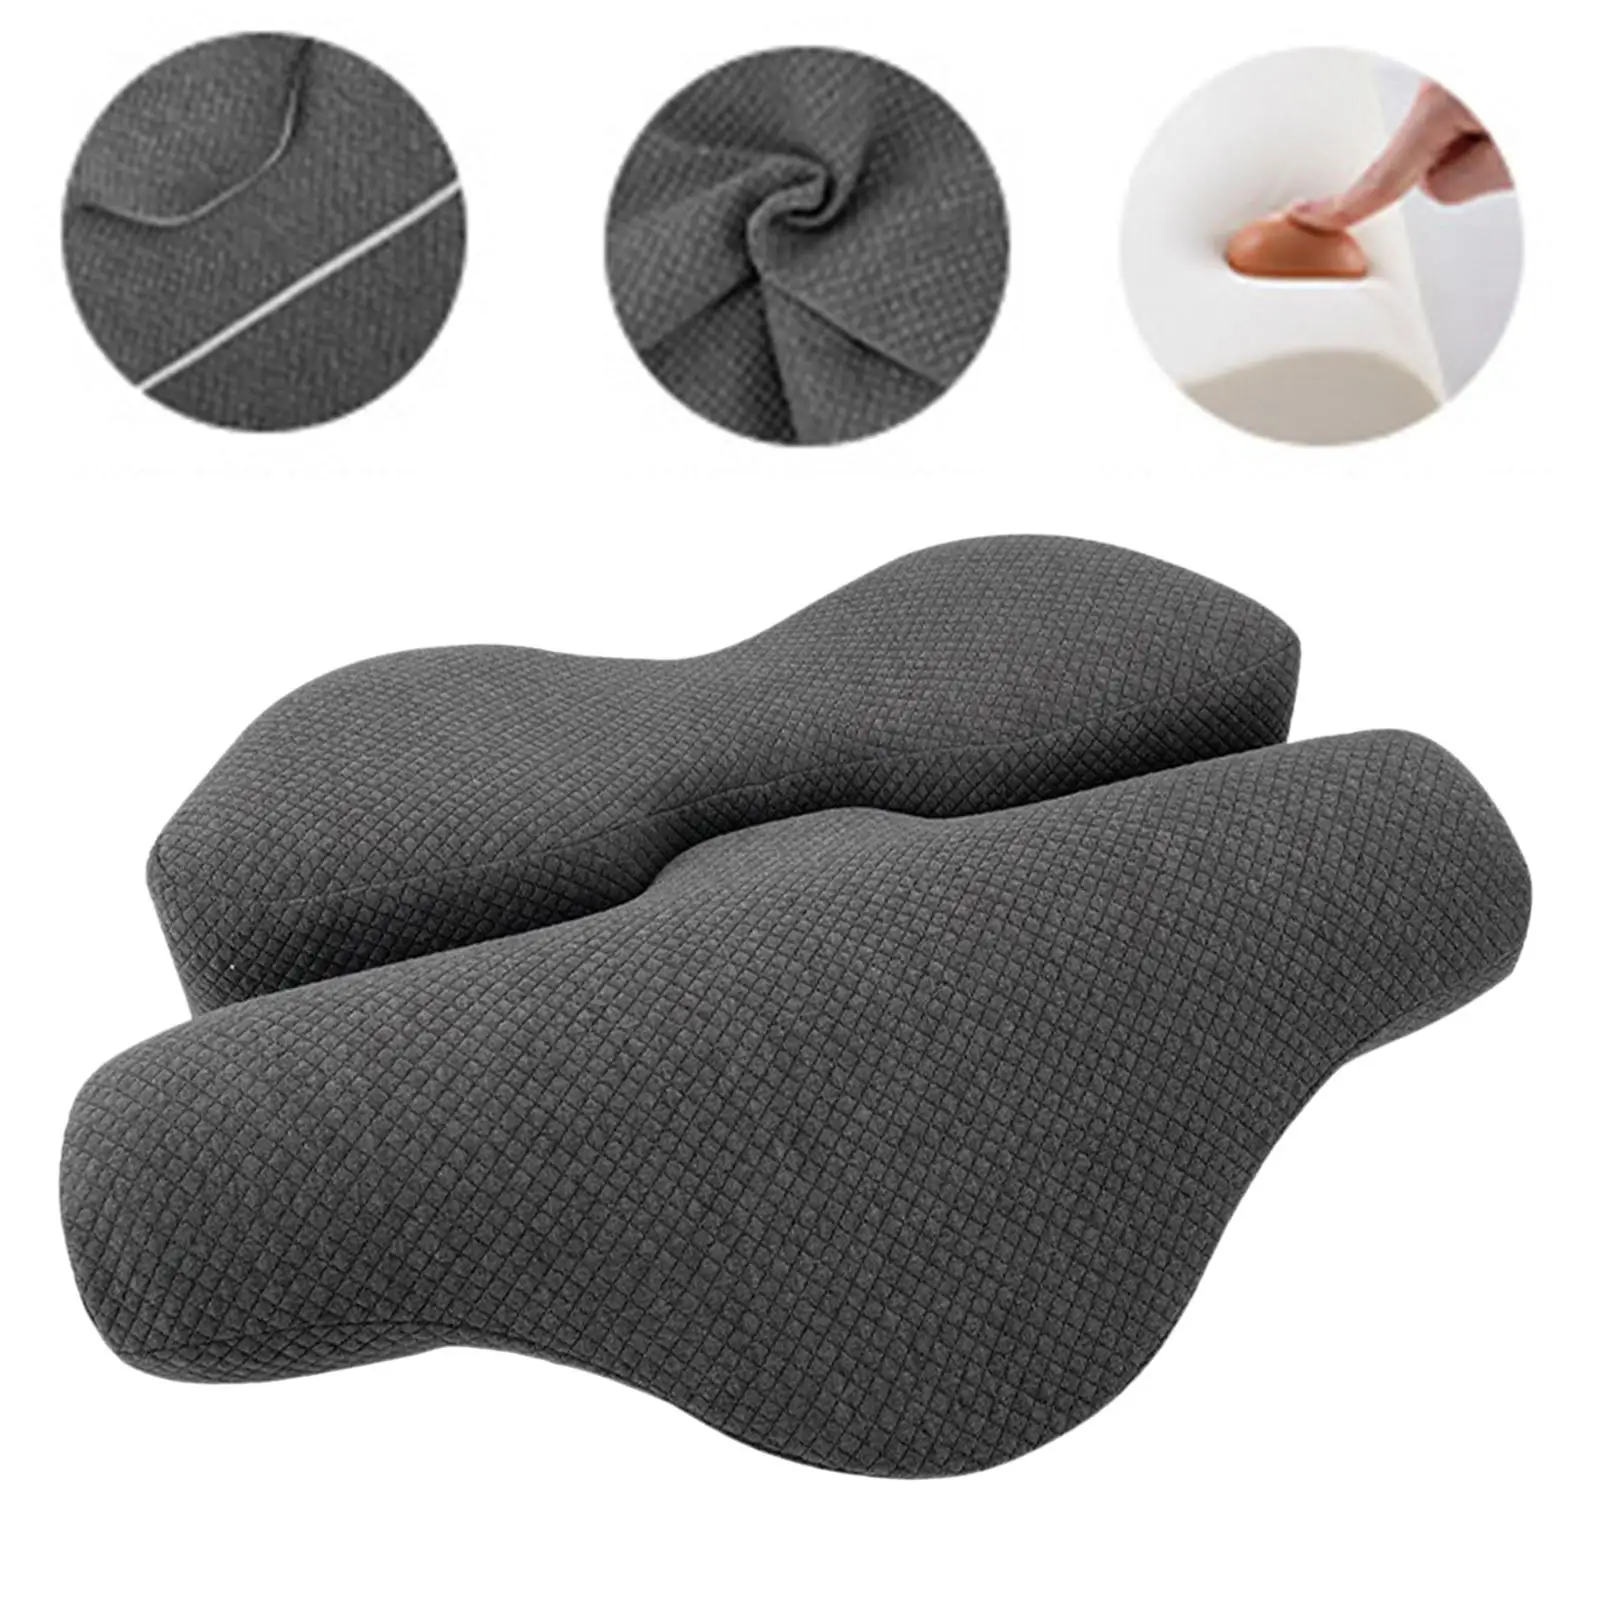 Cervical Pillow Neck and Shoulder Relaxation Soft Sleeping Pillow Neck Pillow for Sleeper All Sleeping Positions Mom Dad Gifts